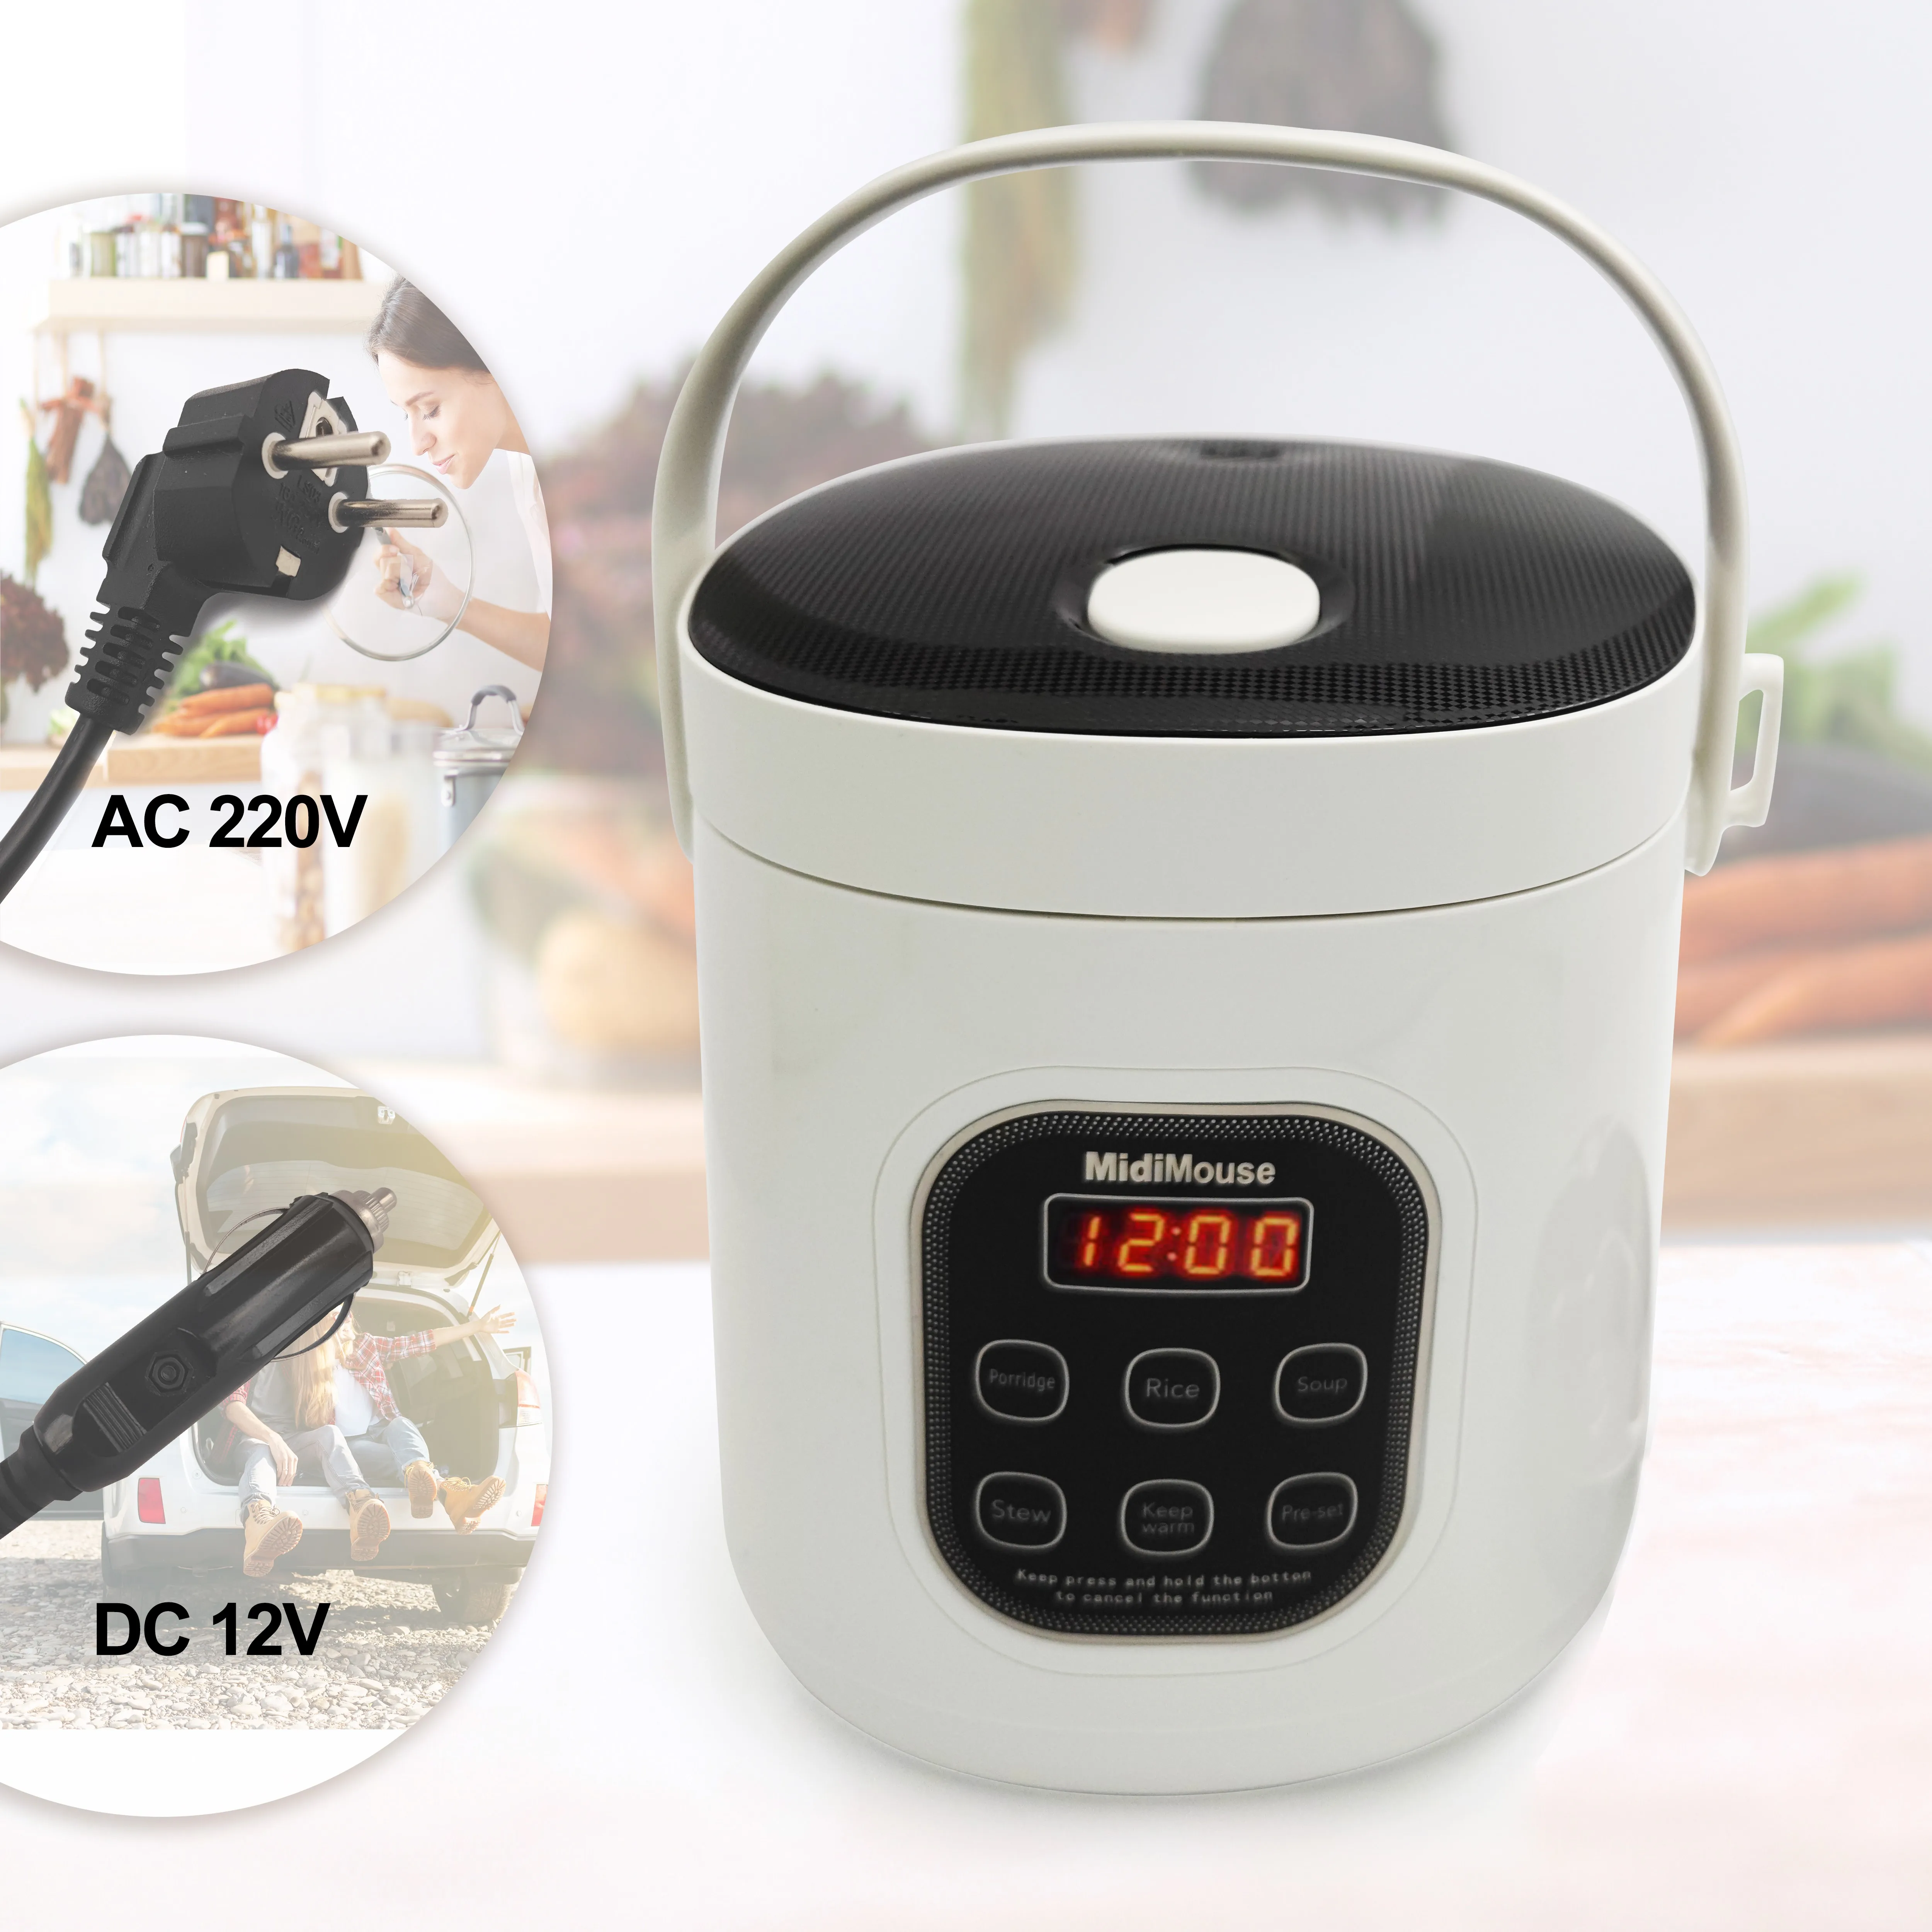 24v to 220V Enough for Six Persons Rice Cooker Used in Car and Home 12v to 220v or Truck and Home enlarge